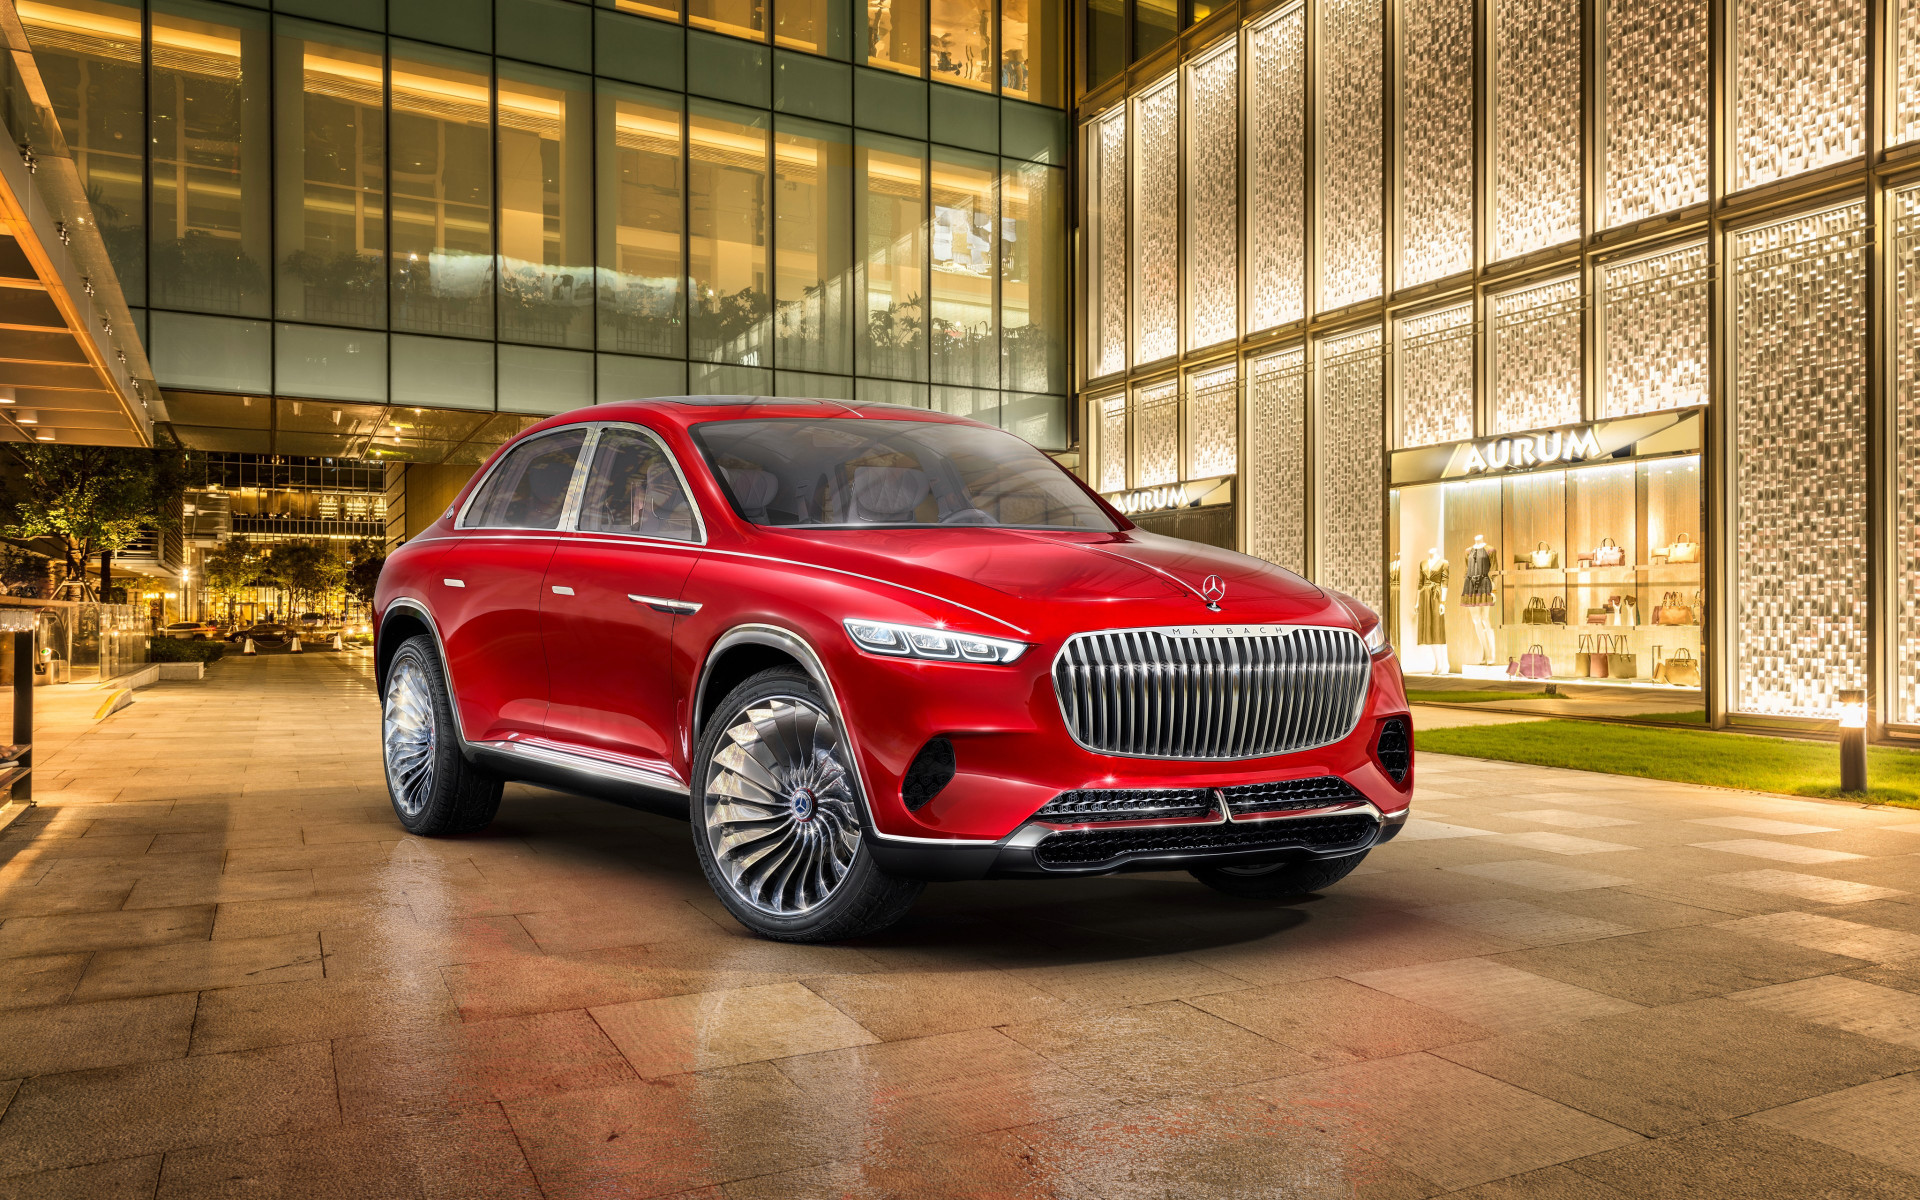 The Vision Mercedes Maybach Ultimate Luxury wallpaper 1920x1200